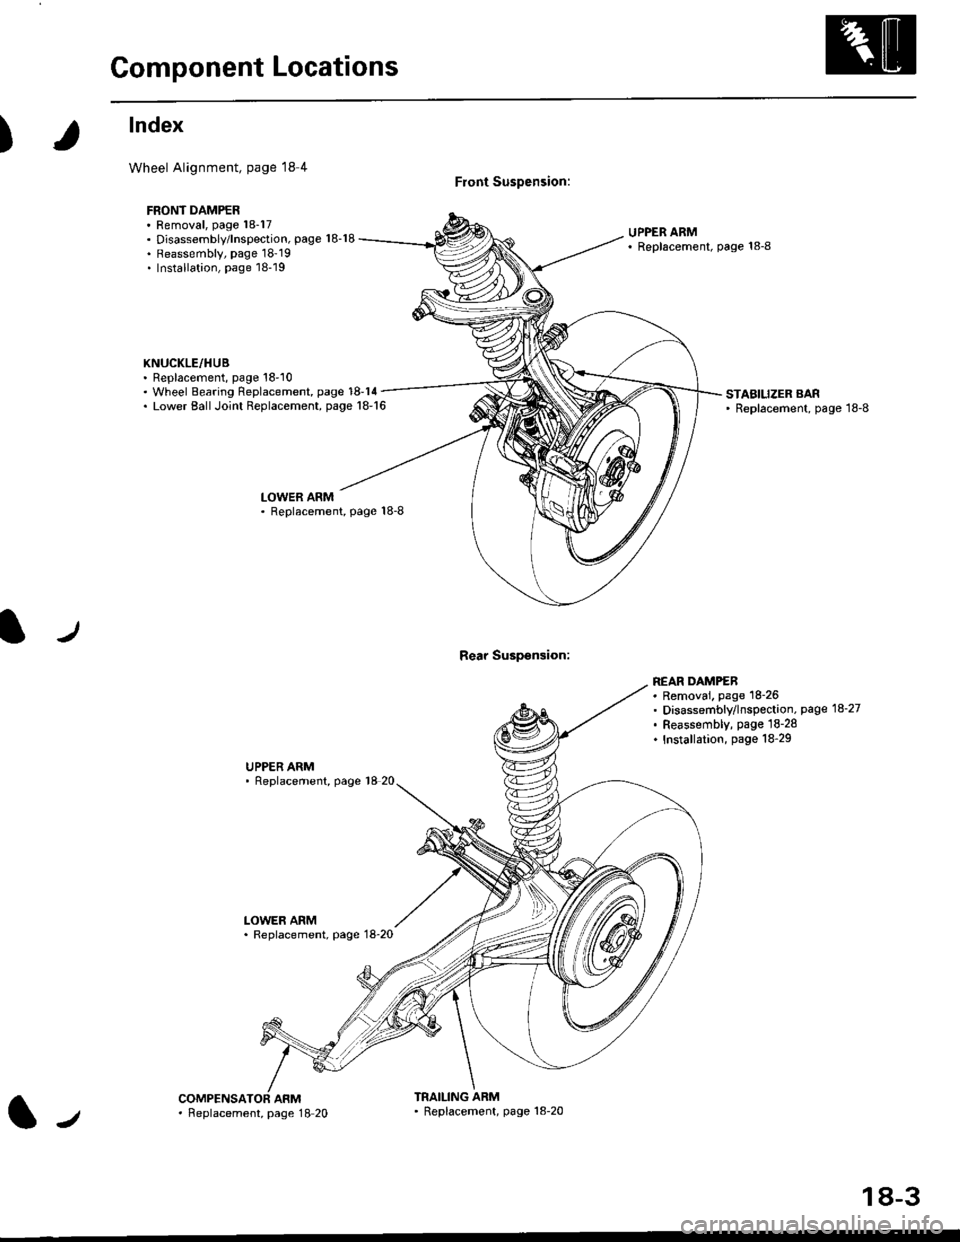 HONDA CIVIC 1997 6.G Workshop Manual Component Locations
)
lndex
Wheel Alignment, page l8 4
FBONT DAMPER. Removal, page 18-17. Disassembly/lnspection, page 18-18. Reassembly, page 1819. Installation, page 18-19
KNUCKLE/HUB. Replacement,